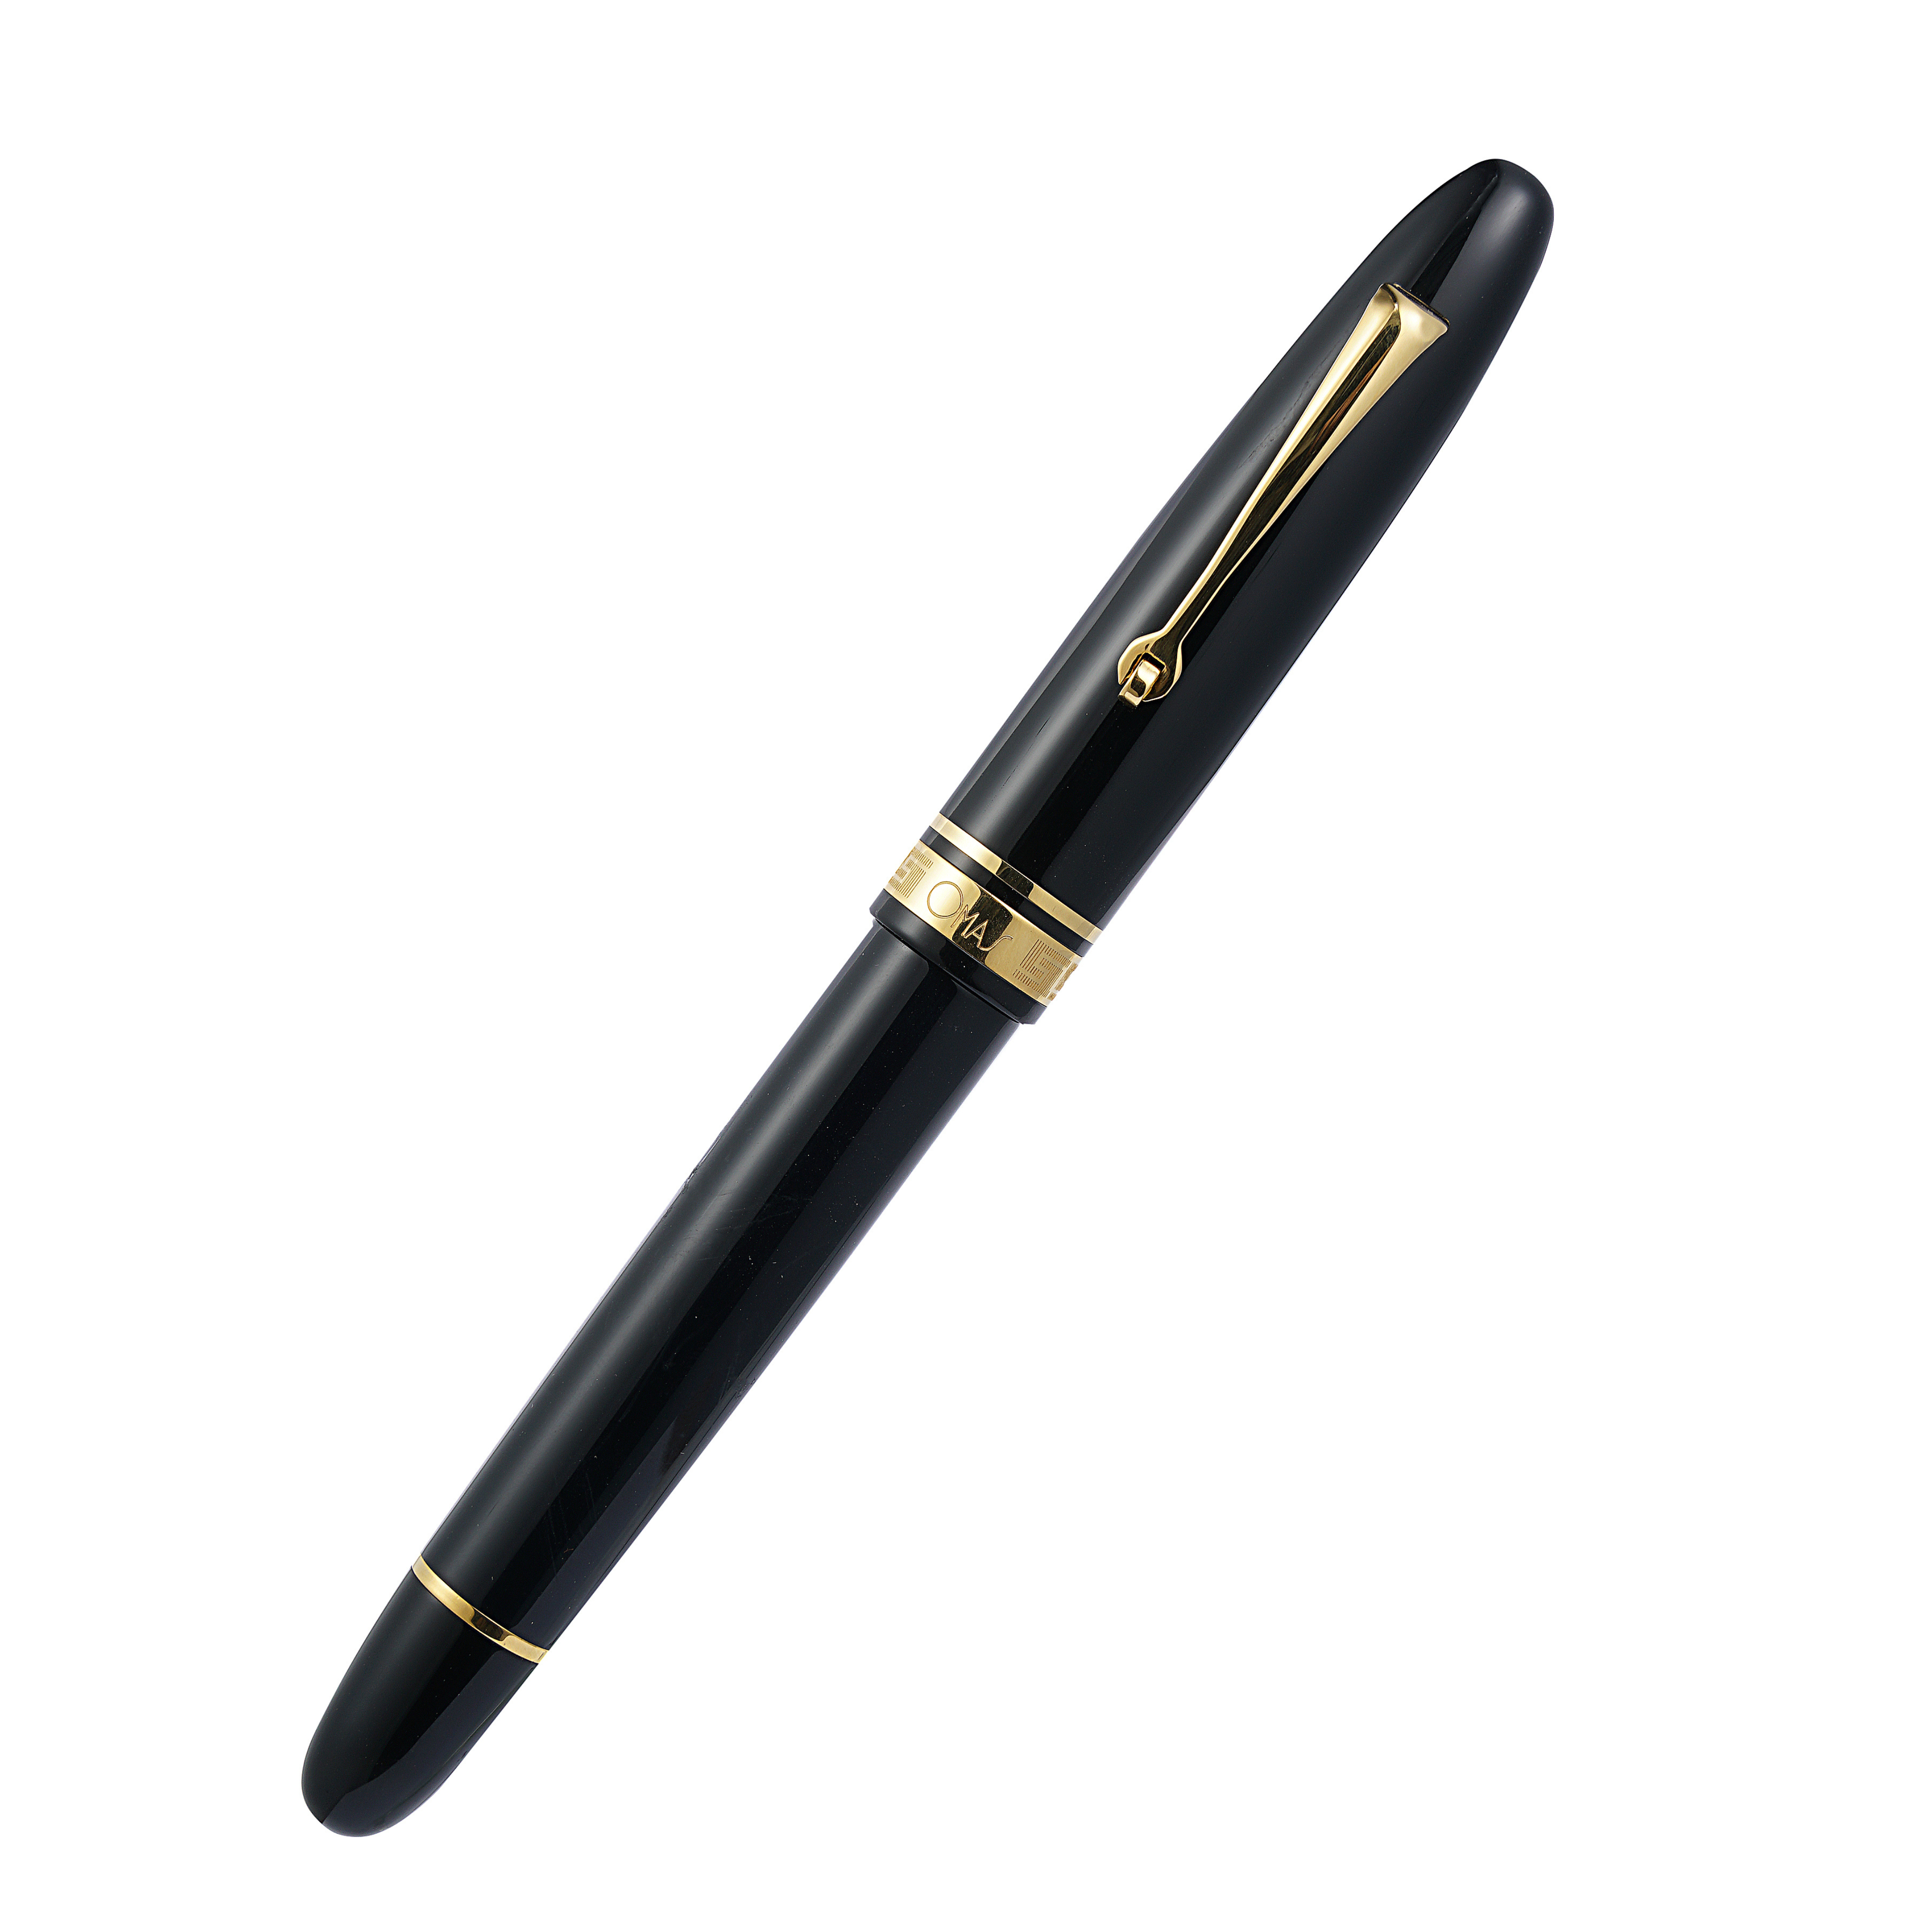 Omas Ogiva Fountain Pen in Nera with Gold Trim